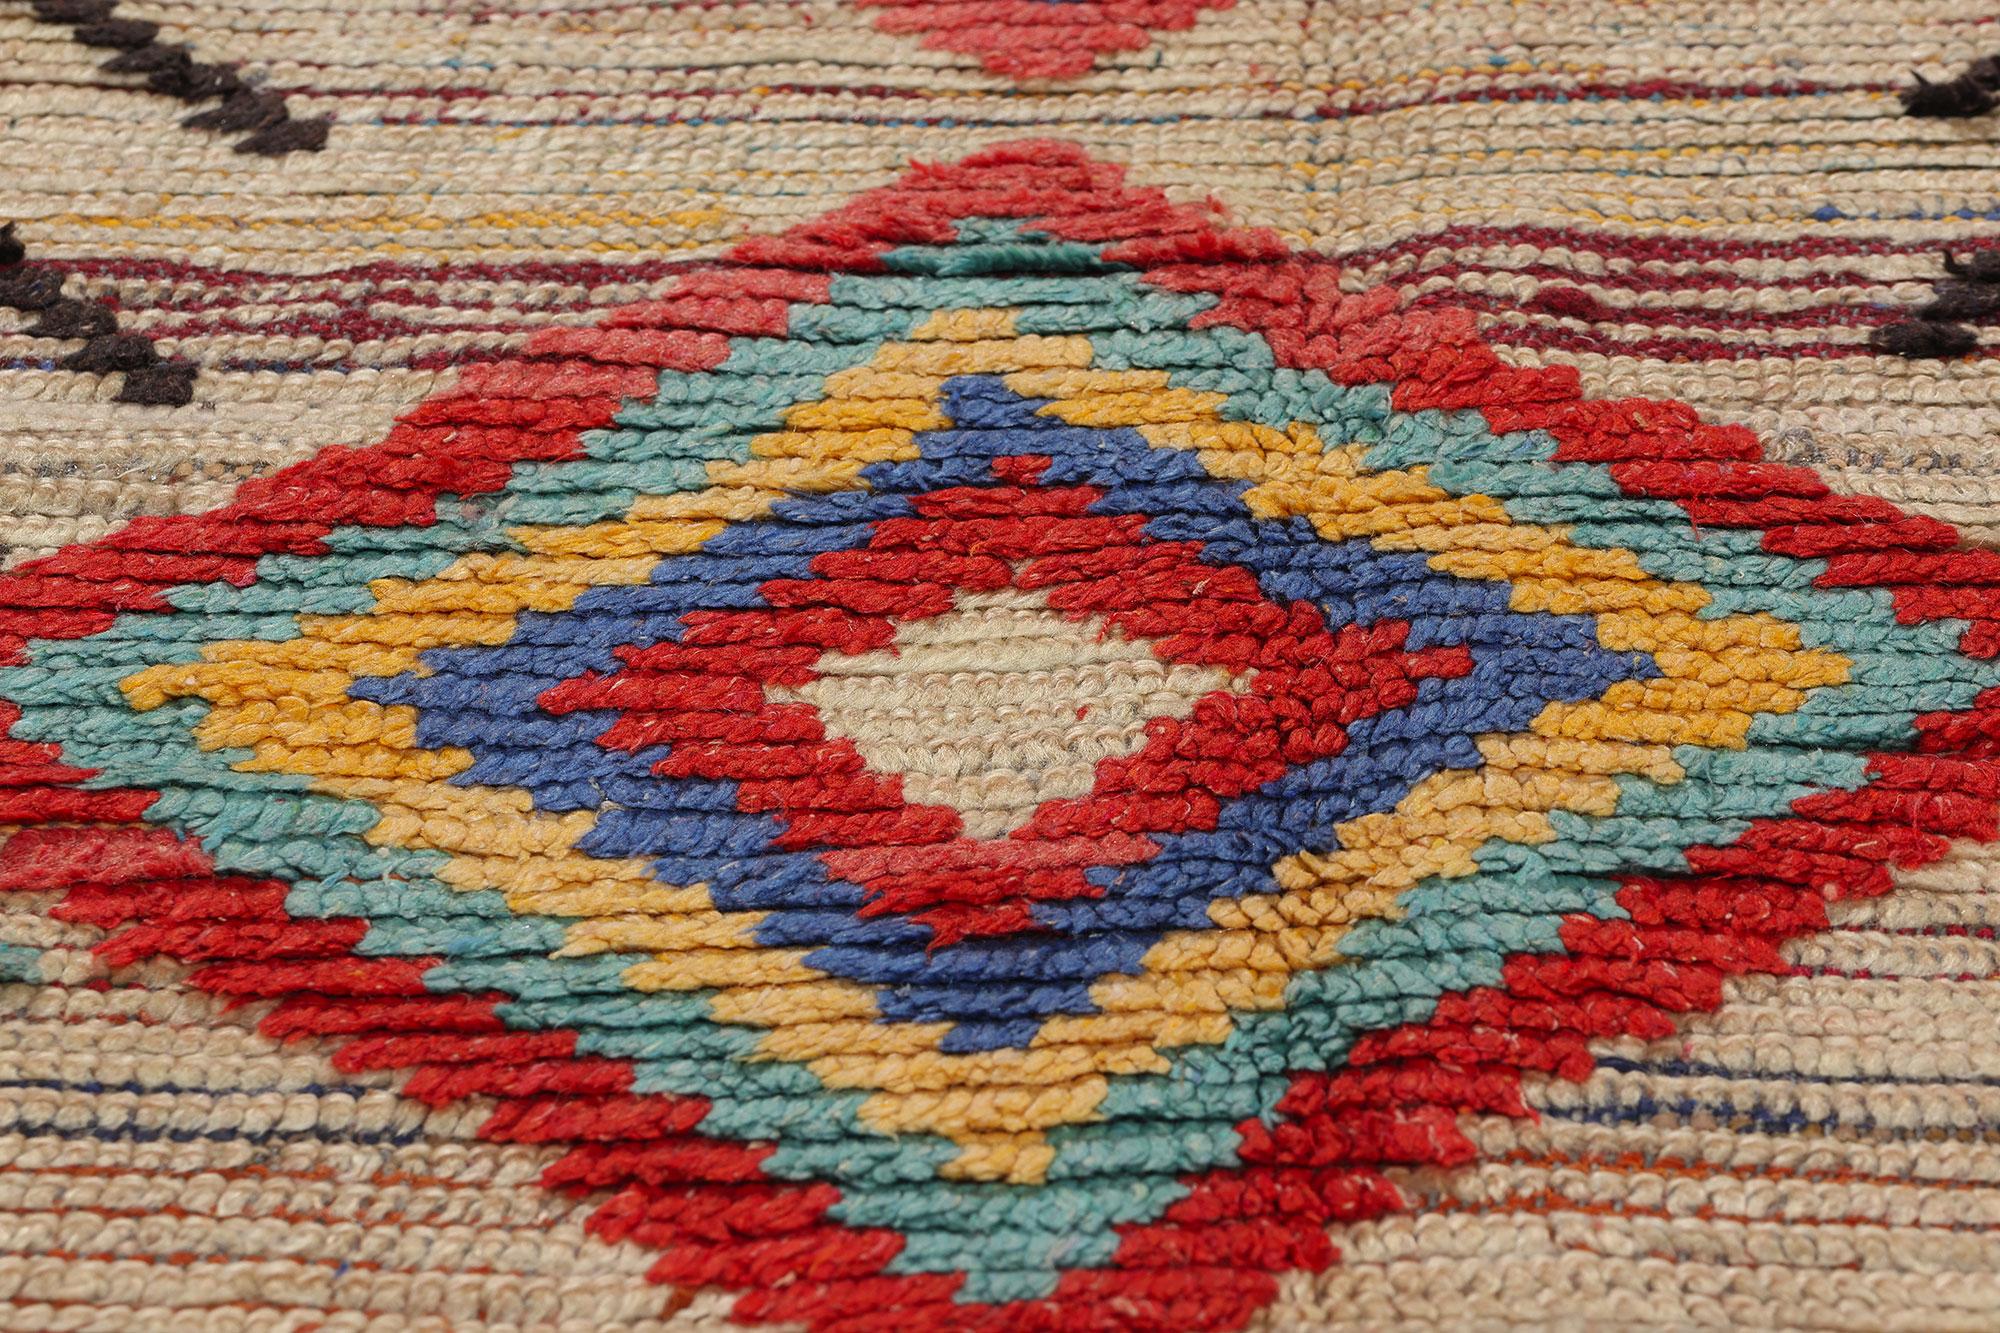 Vintage Moroccan Azilal Rug, Global Boho Chic Meets Tribal Enchantment In Good Condition For Sale In Dallas, TX